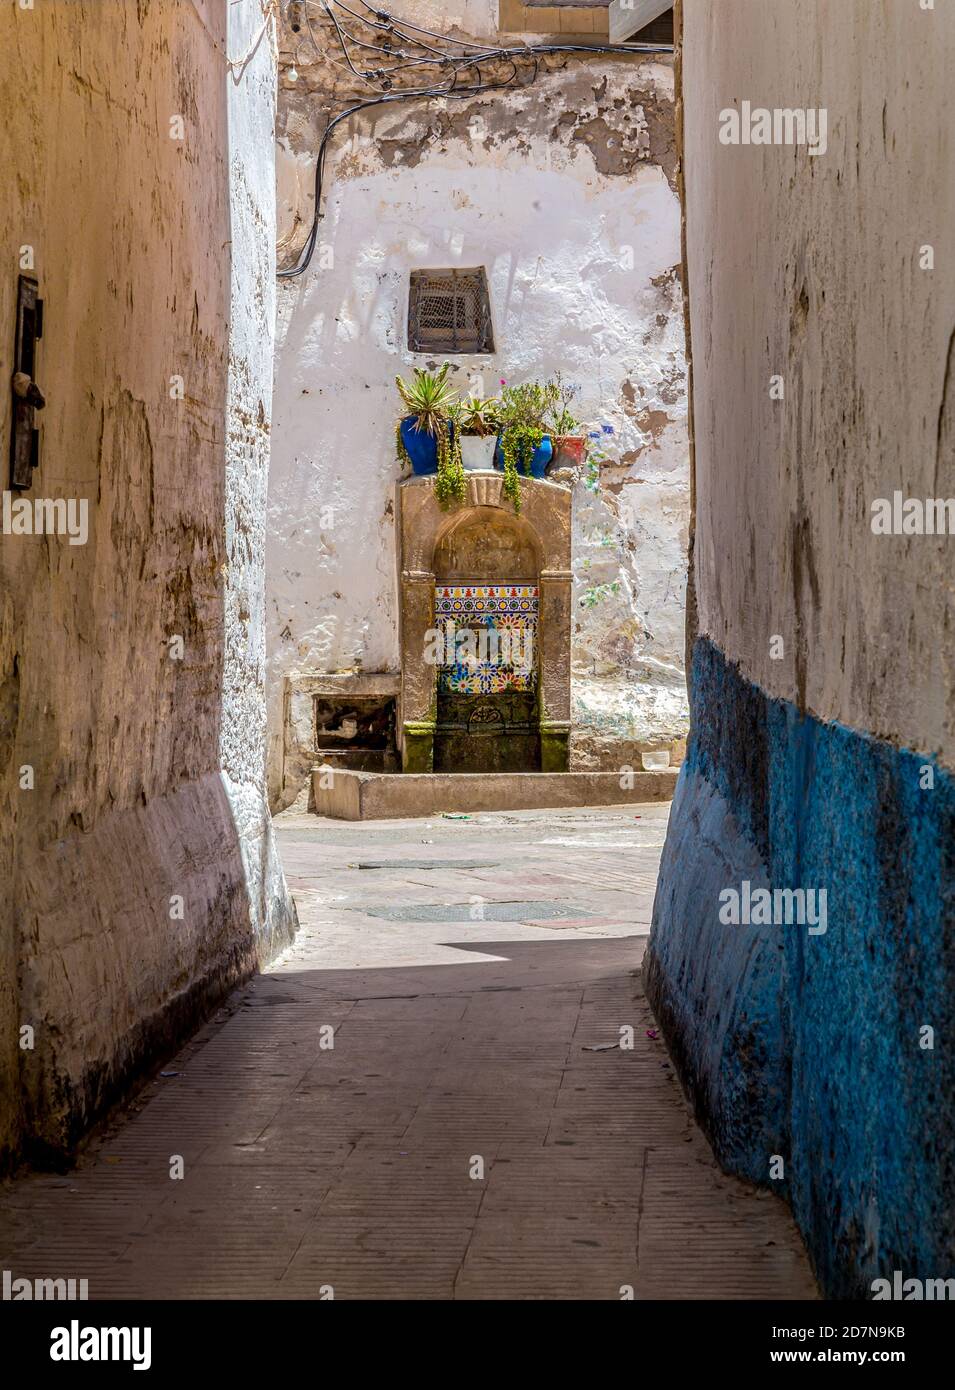 Typical narrow street with Moroccan mosaic decoration drinking fountain in the Medina of Essaouria,Morocco. Stock Photo